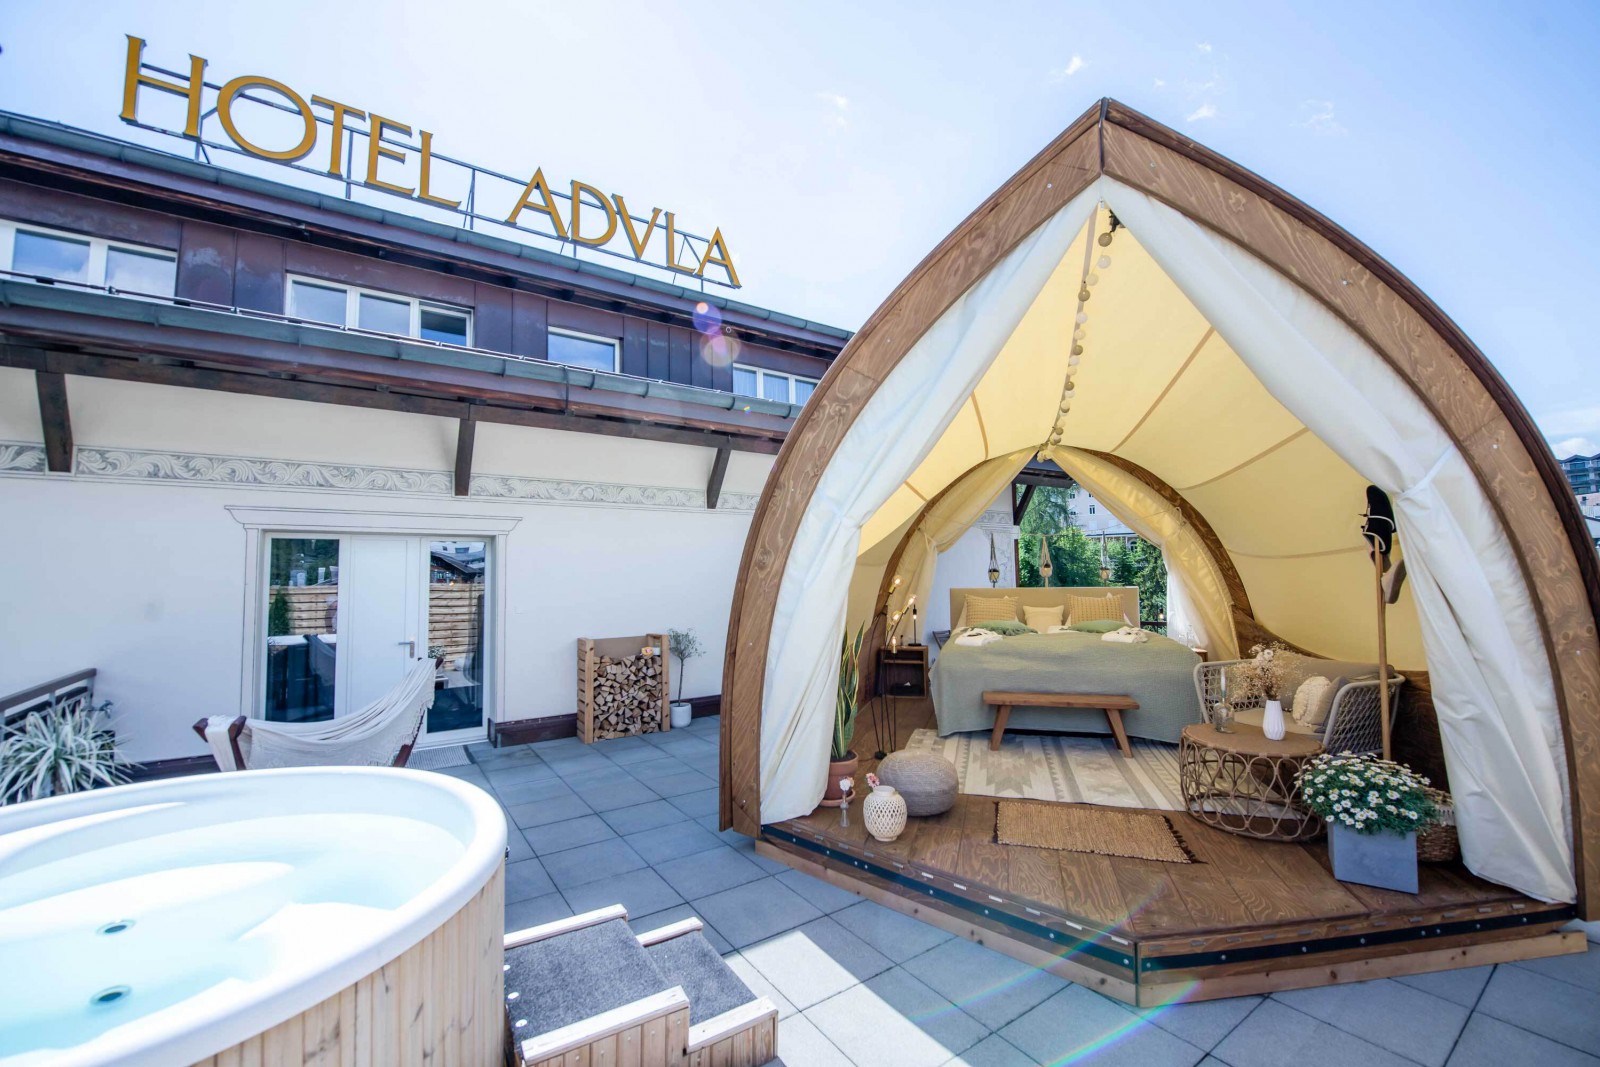 Hotel Adula Glamping Trends